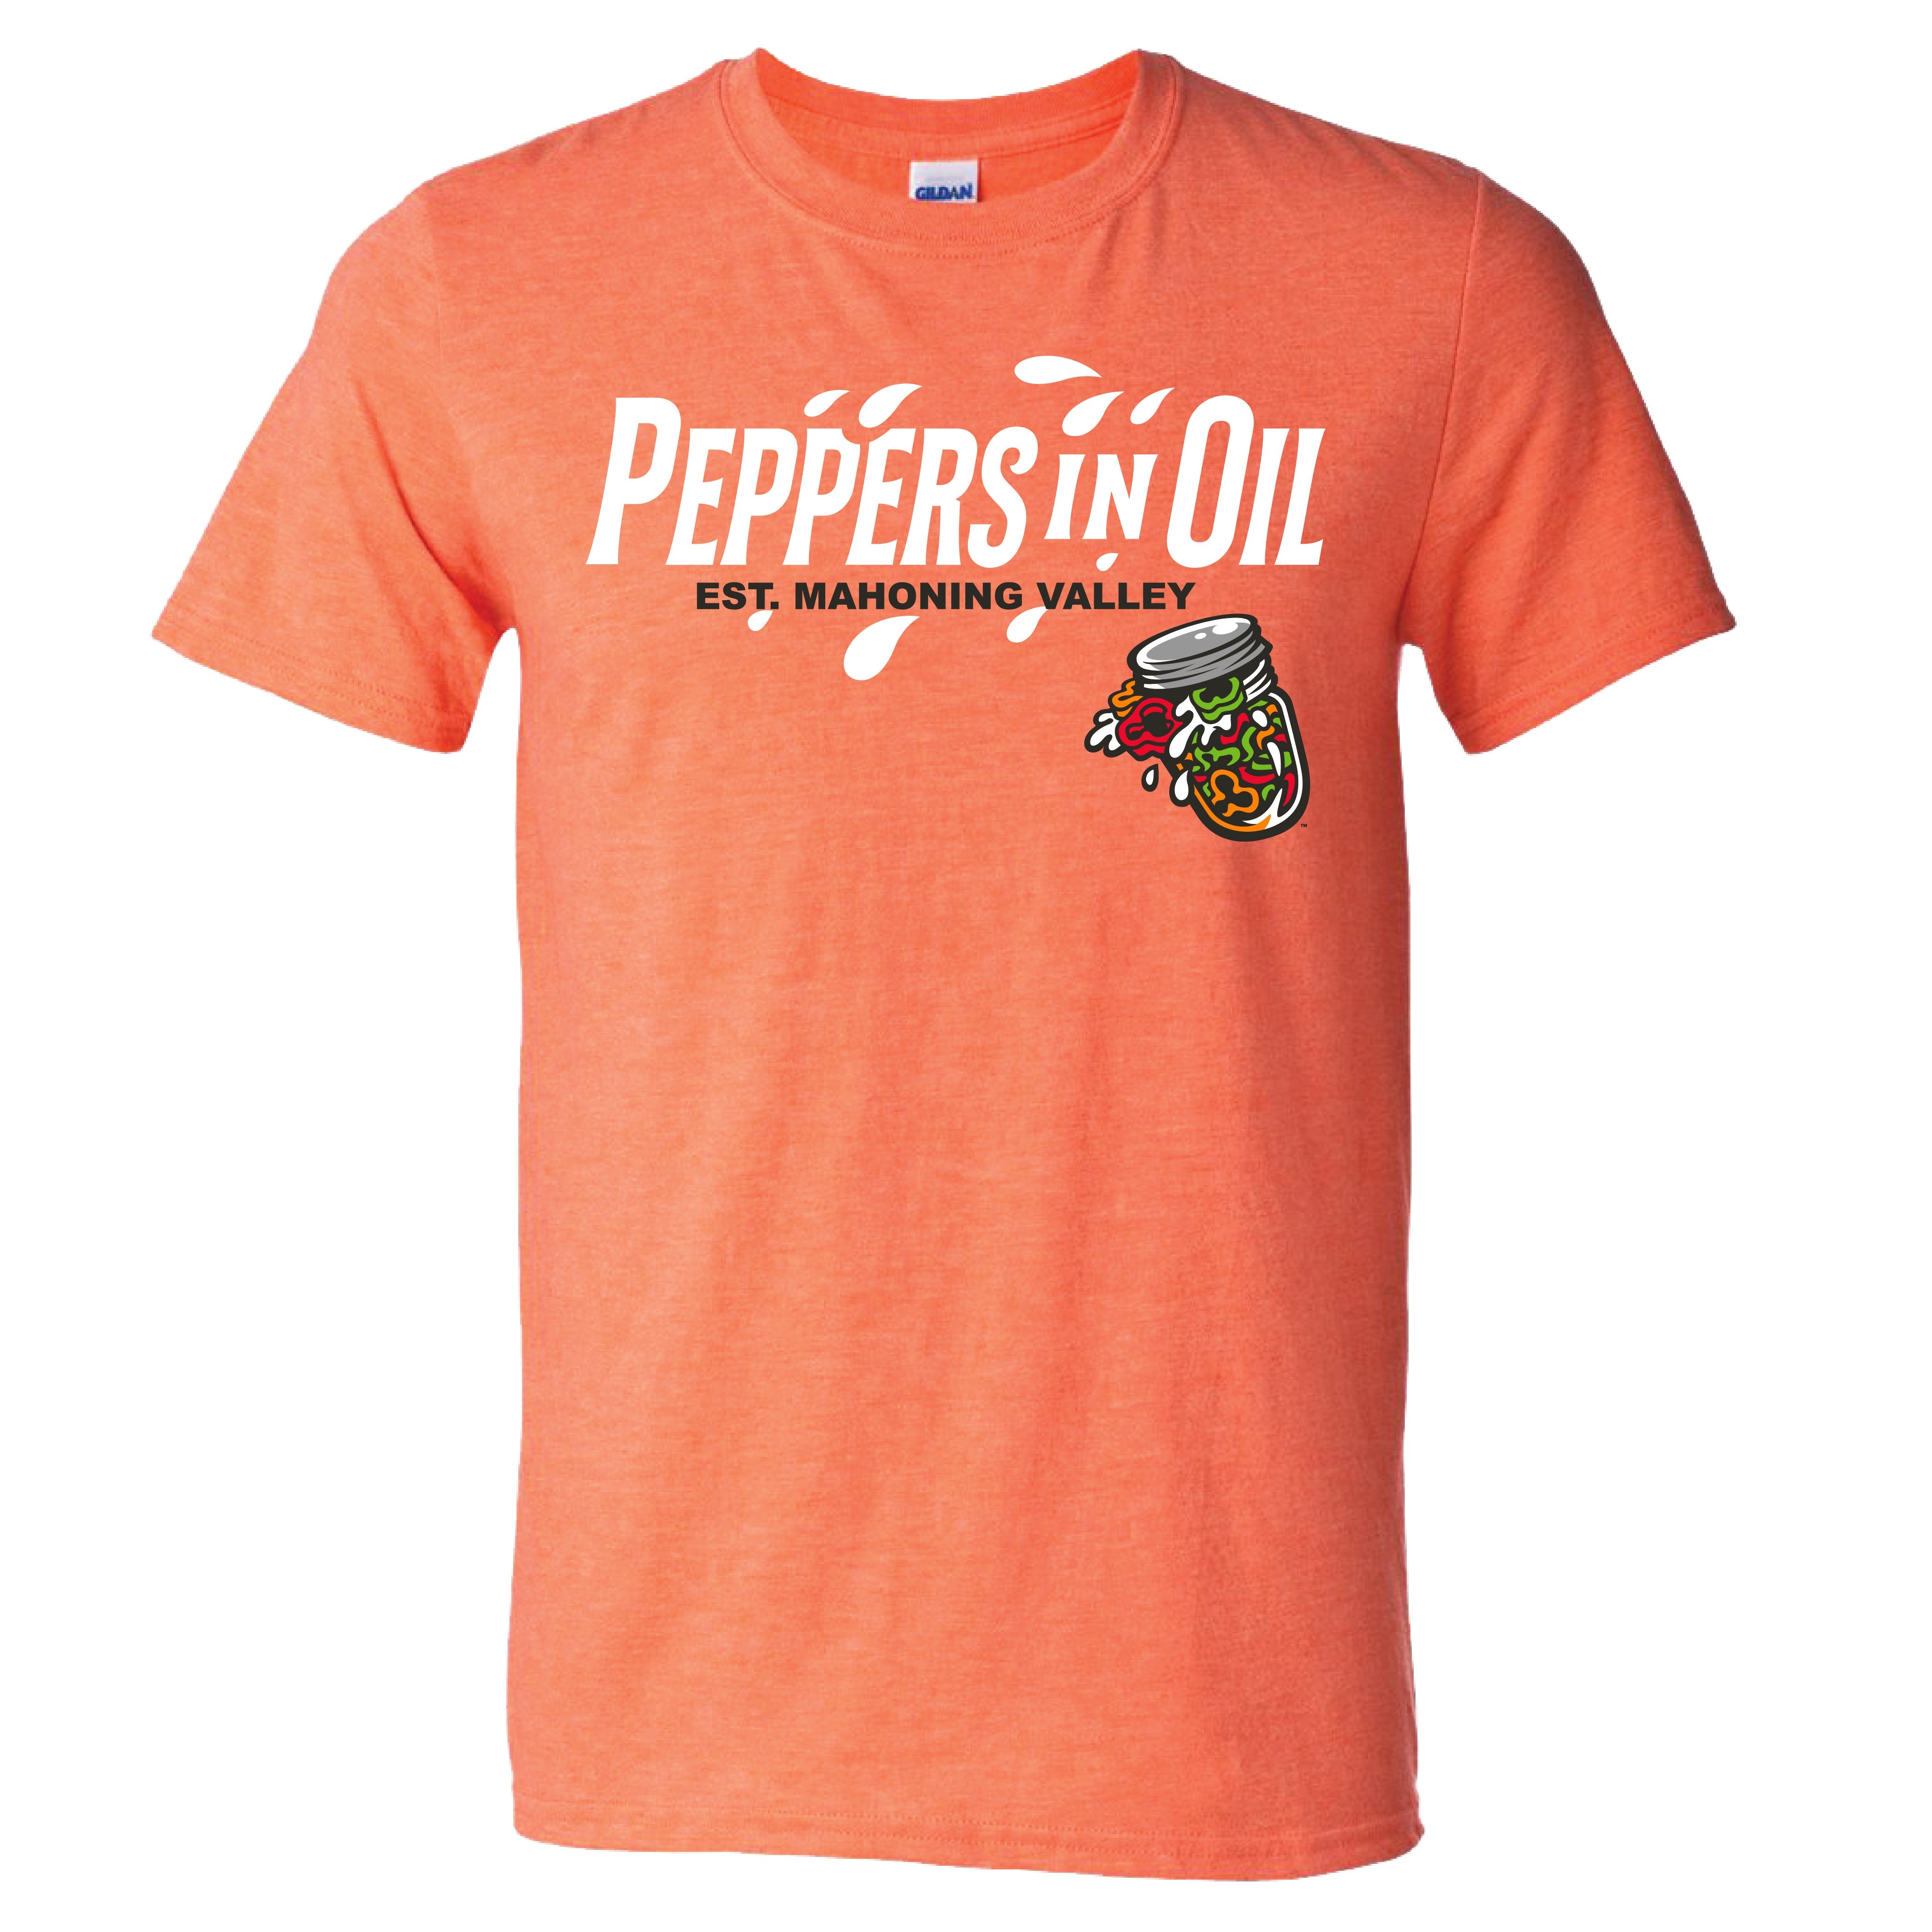 Adult Orange Peppers in Oil T-Shirt-0